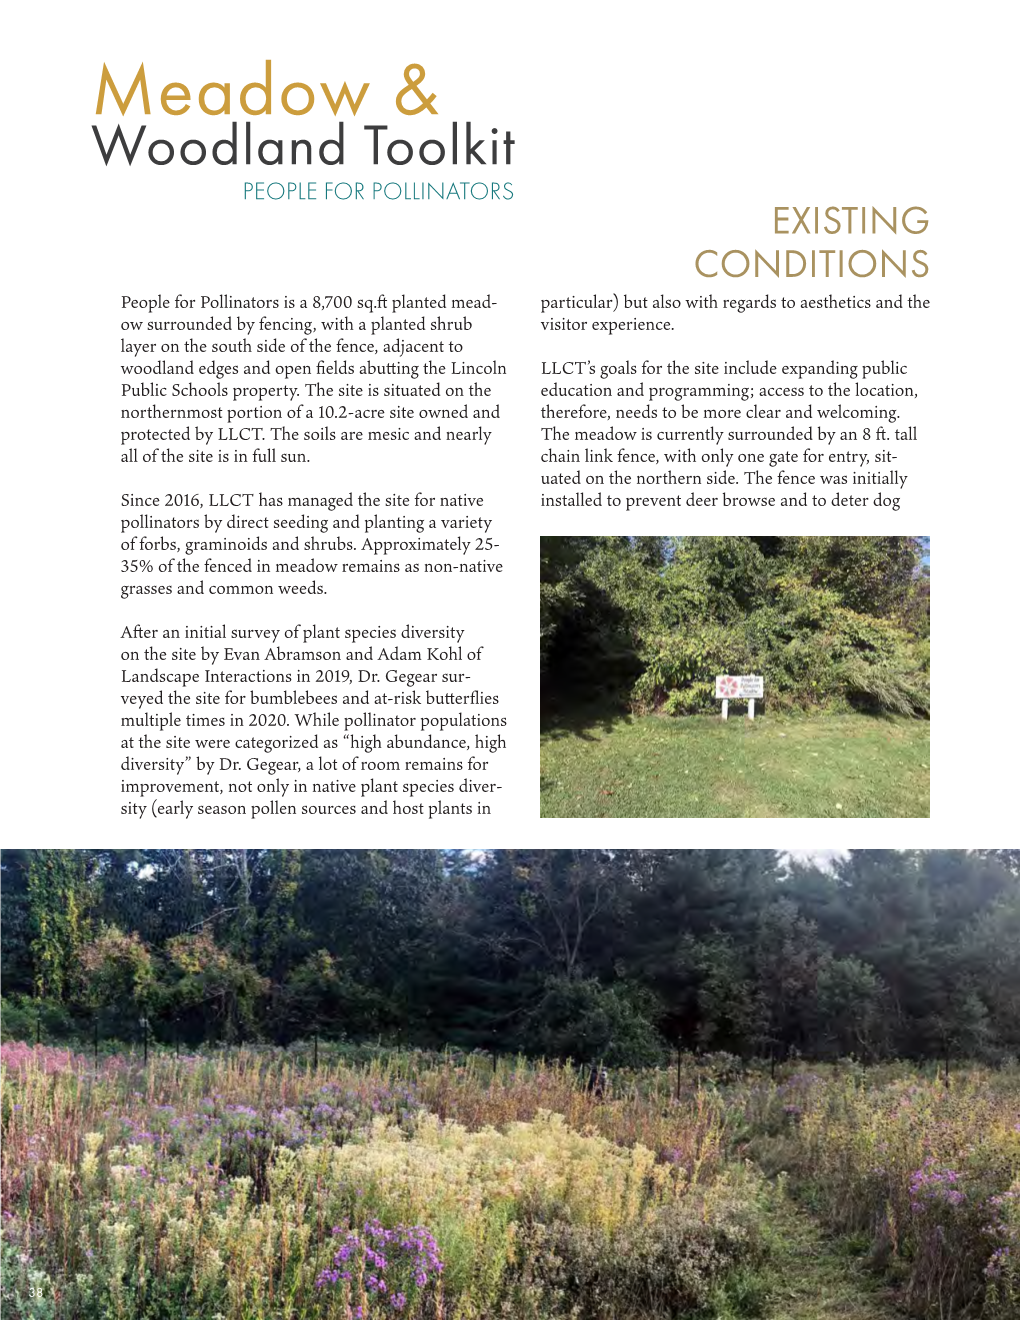 Meadow and Woodland Toolkit